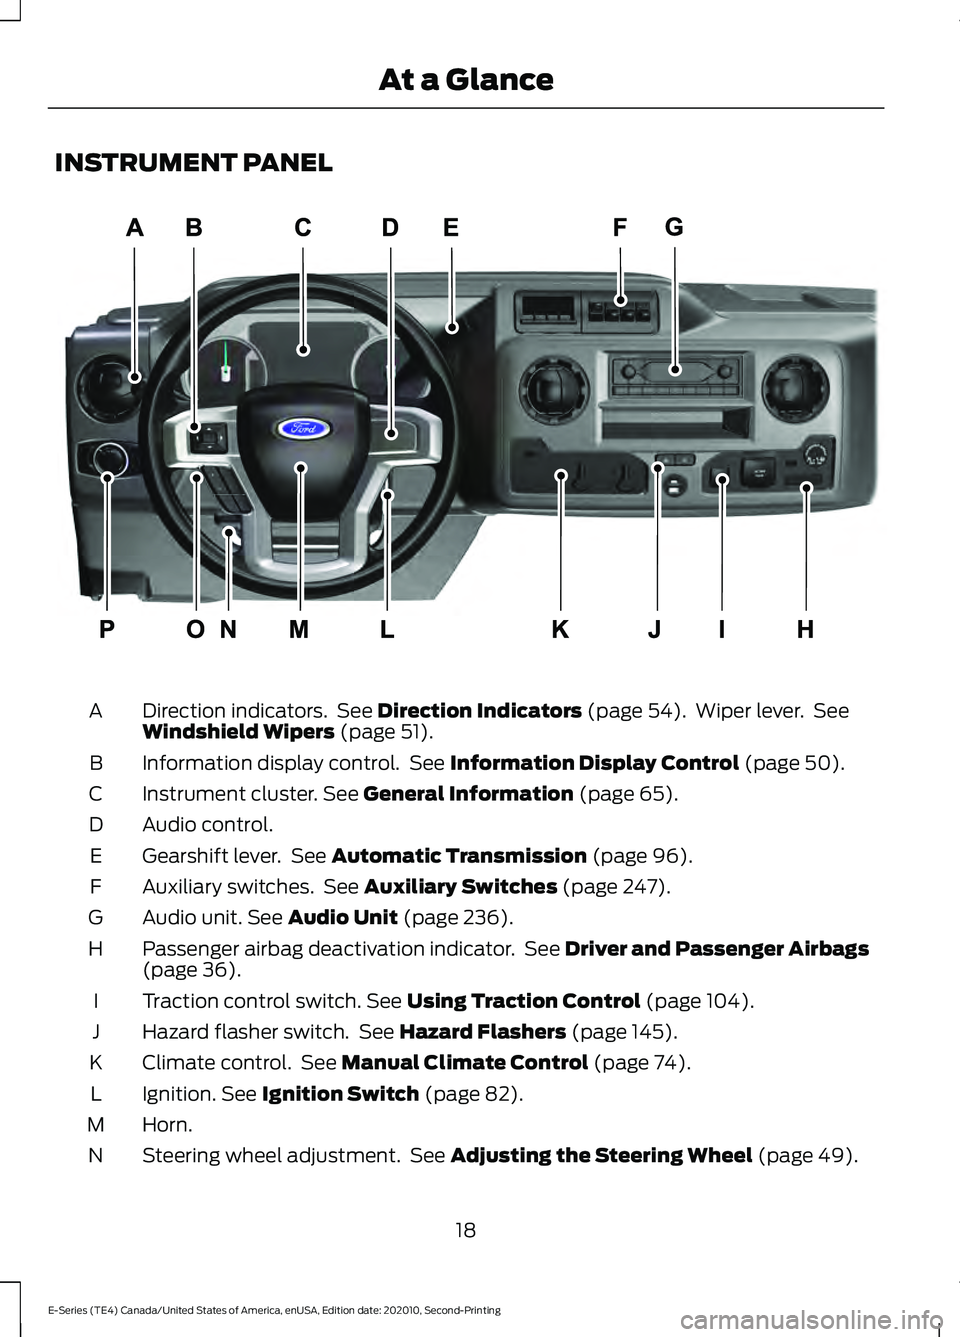 FORD E-450 2022  Owners Manual INSTRUMENT PANEL
Direction indicators.  See Direction Indicators (page 54).  Wiper lever.  See
Windshield Wipers (page 51).
A
Information display control.  See 
Information Display Control (page 50).
